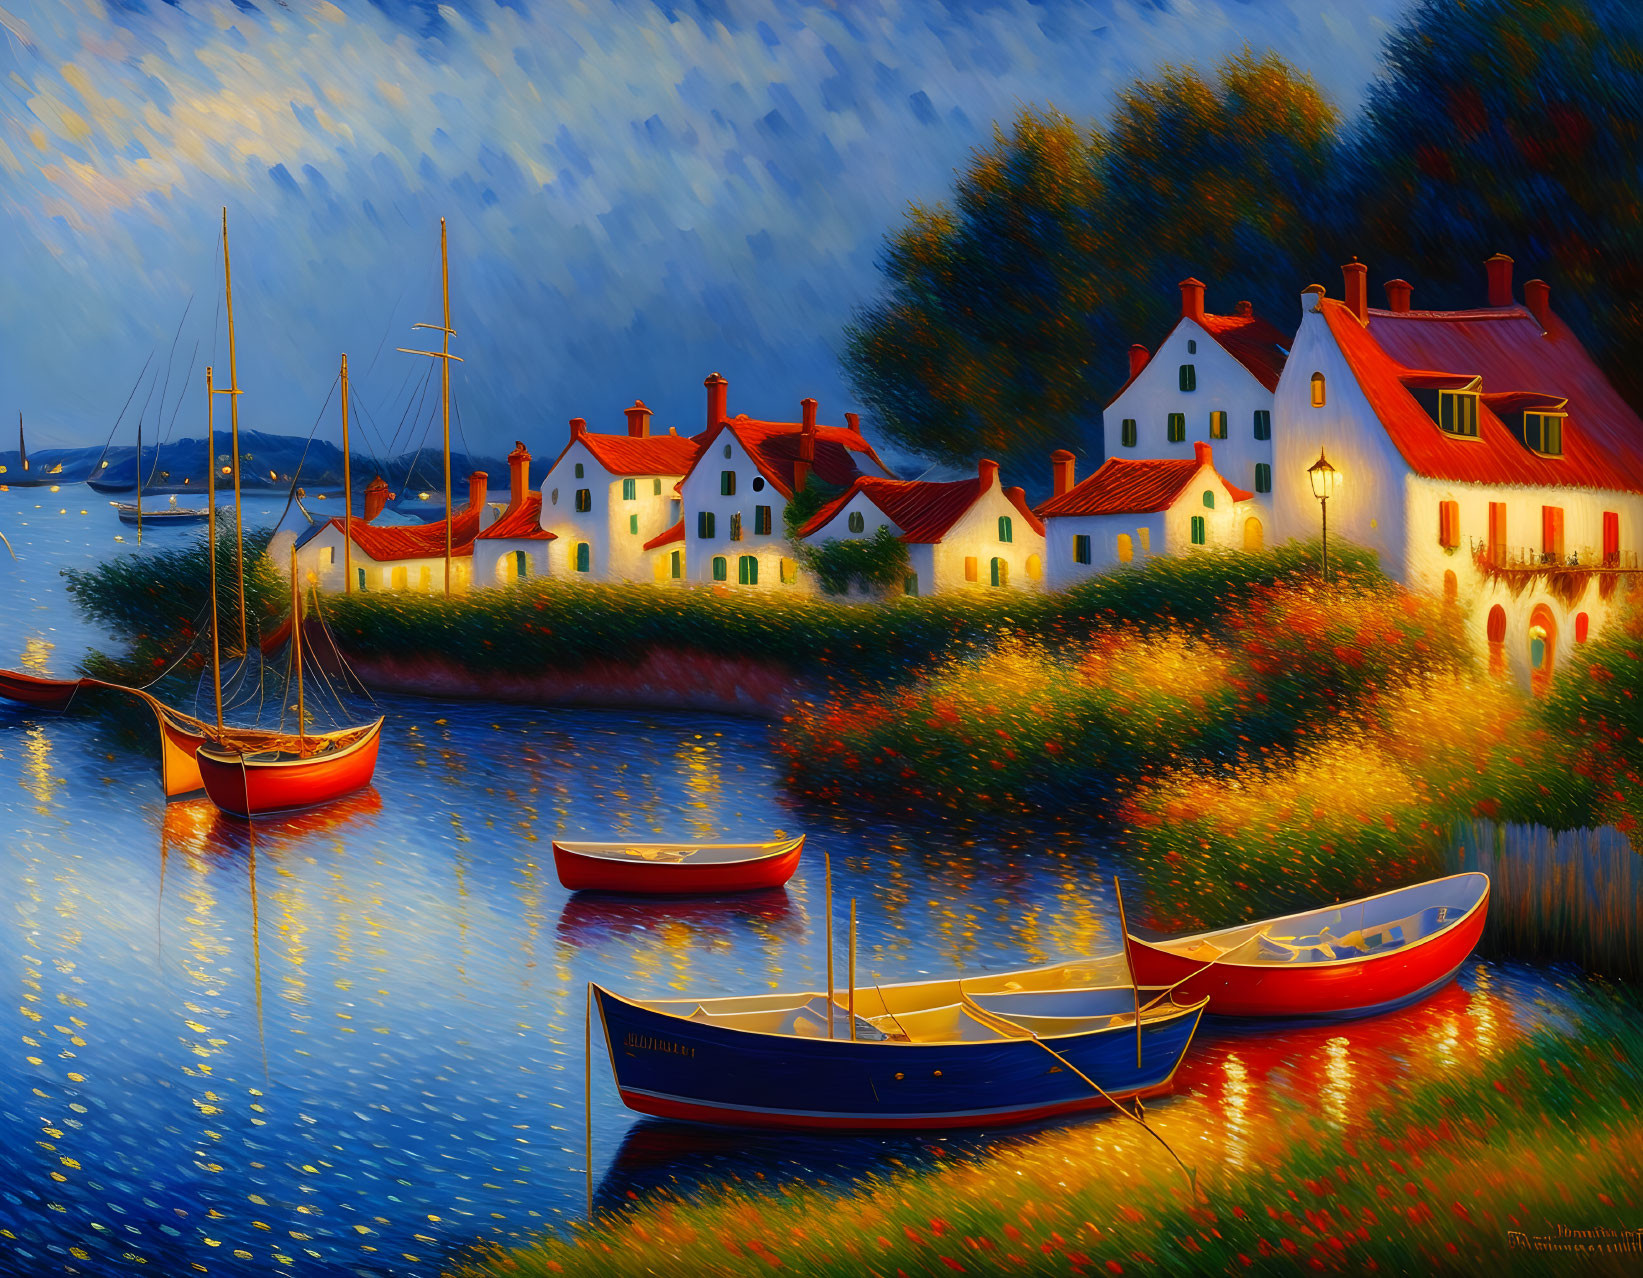 Colorful painting of boats, houses, and twilight sky by tranquil waters